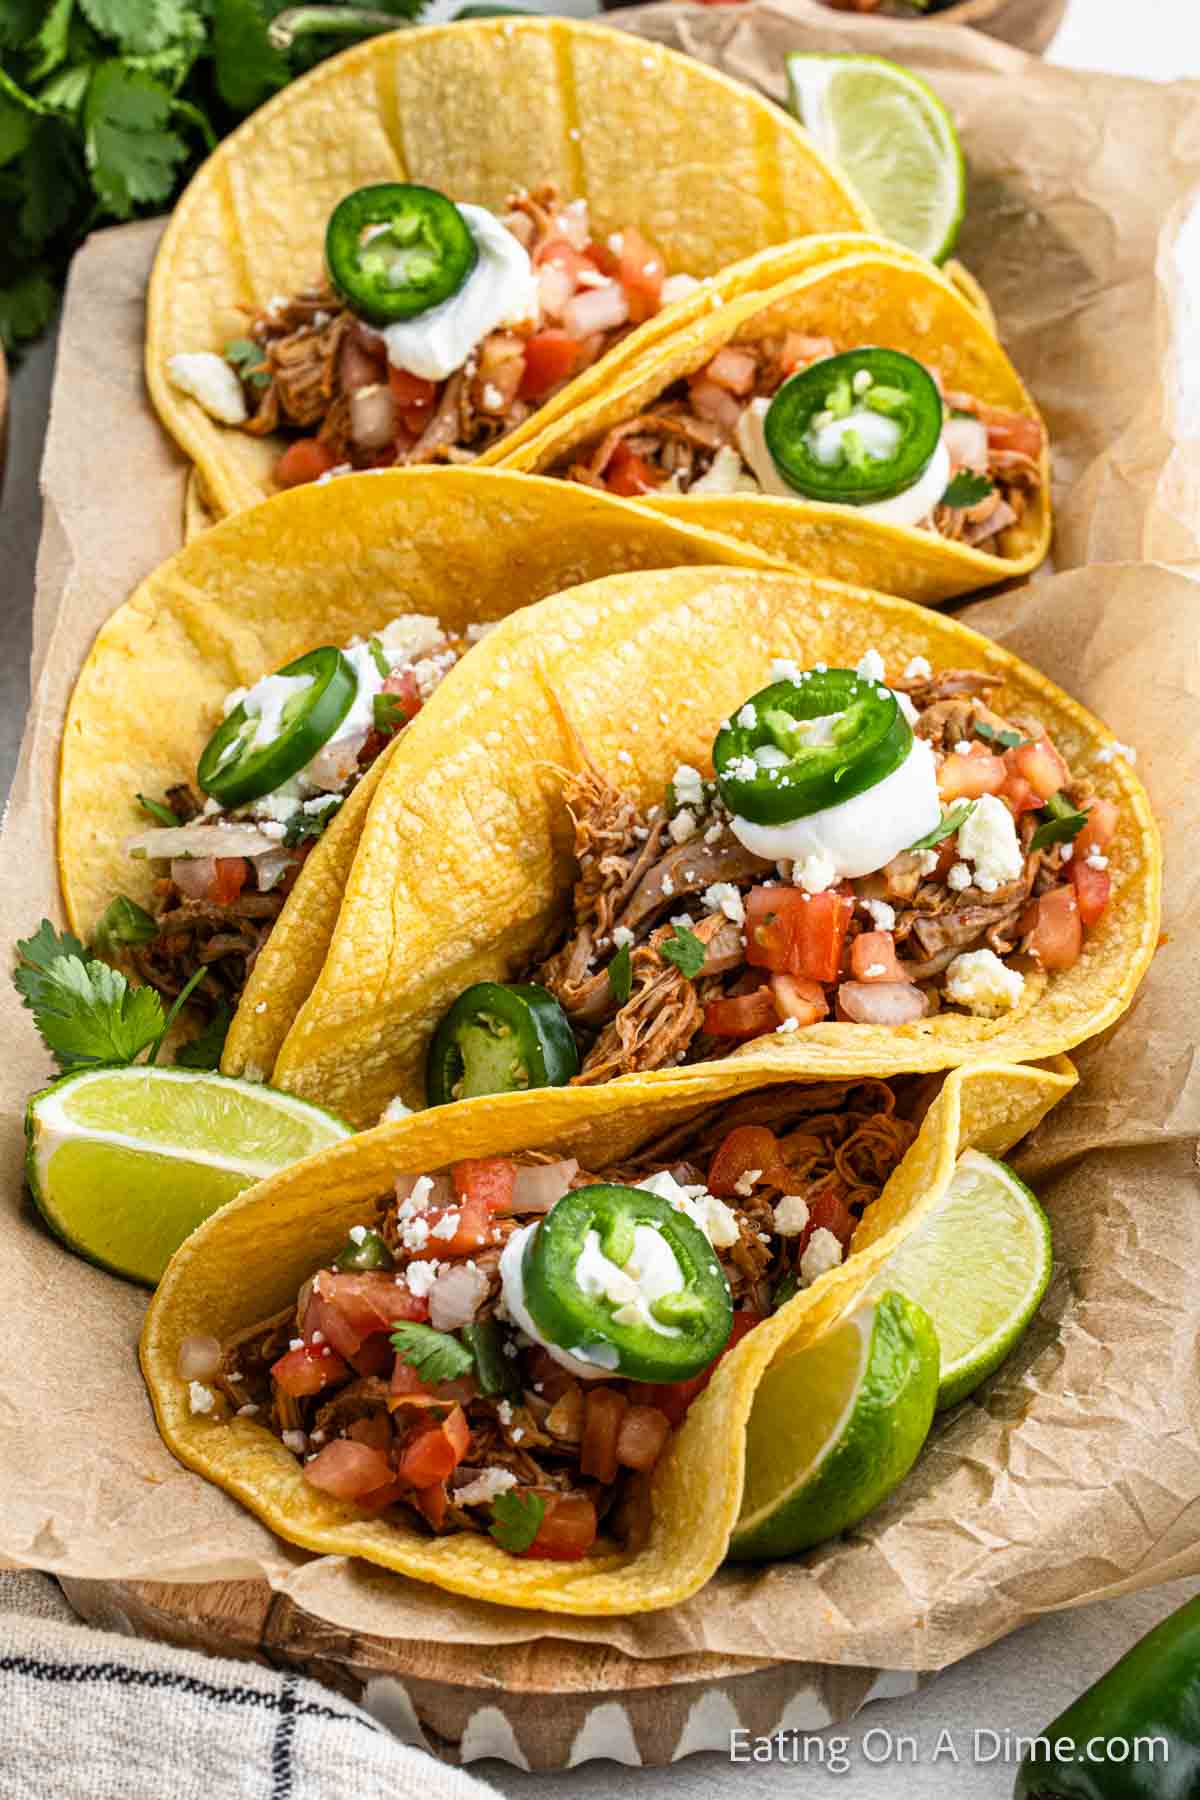 Shredded pork tenderloin tacos placed in a serving platter. The tacos are topped with pico de gallo, slice jalapenos and sour cream 